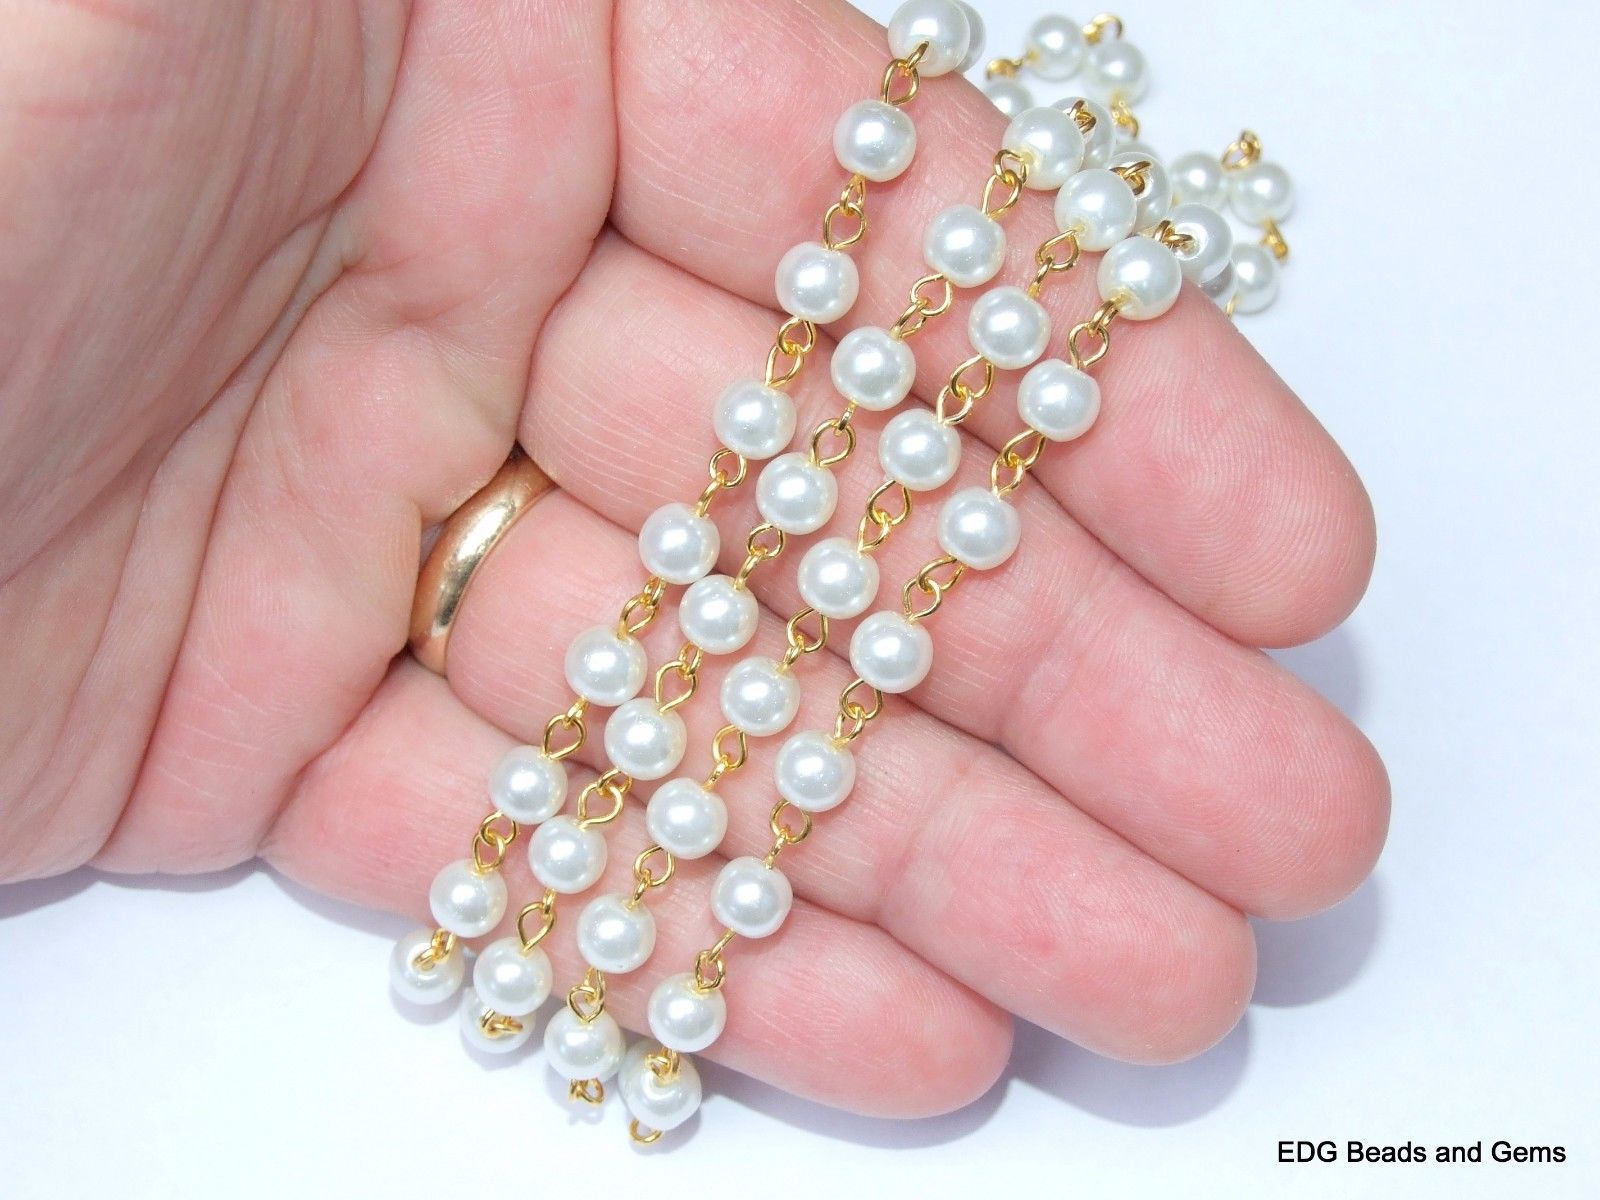 White Pearl Rosary Chain, 1 Meter, Bulk Chain, Round Glass Beads, Beaded Chain, Body Chain, Gold Chain, Necklace Chain, Belly Chain, 6mm, 02